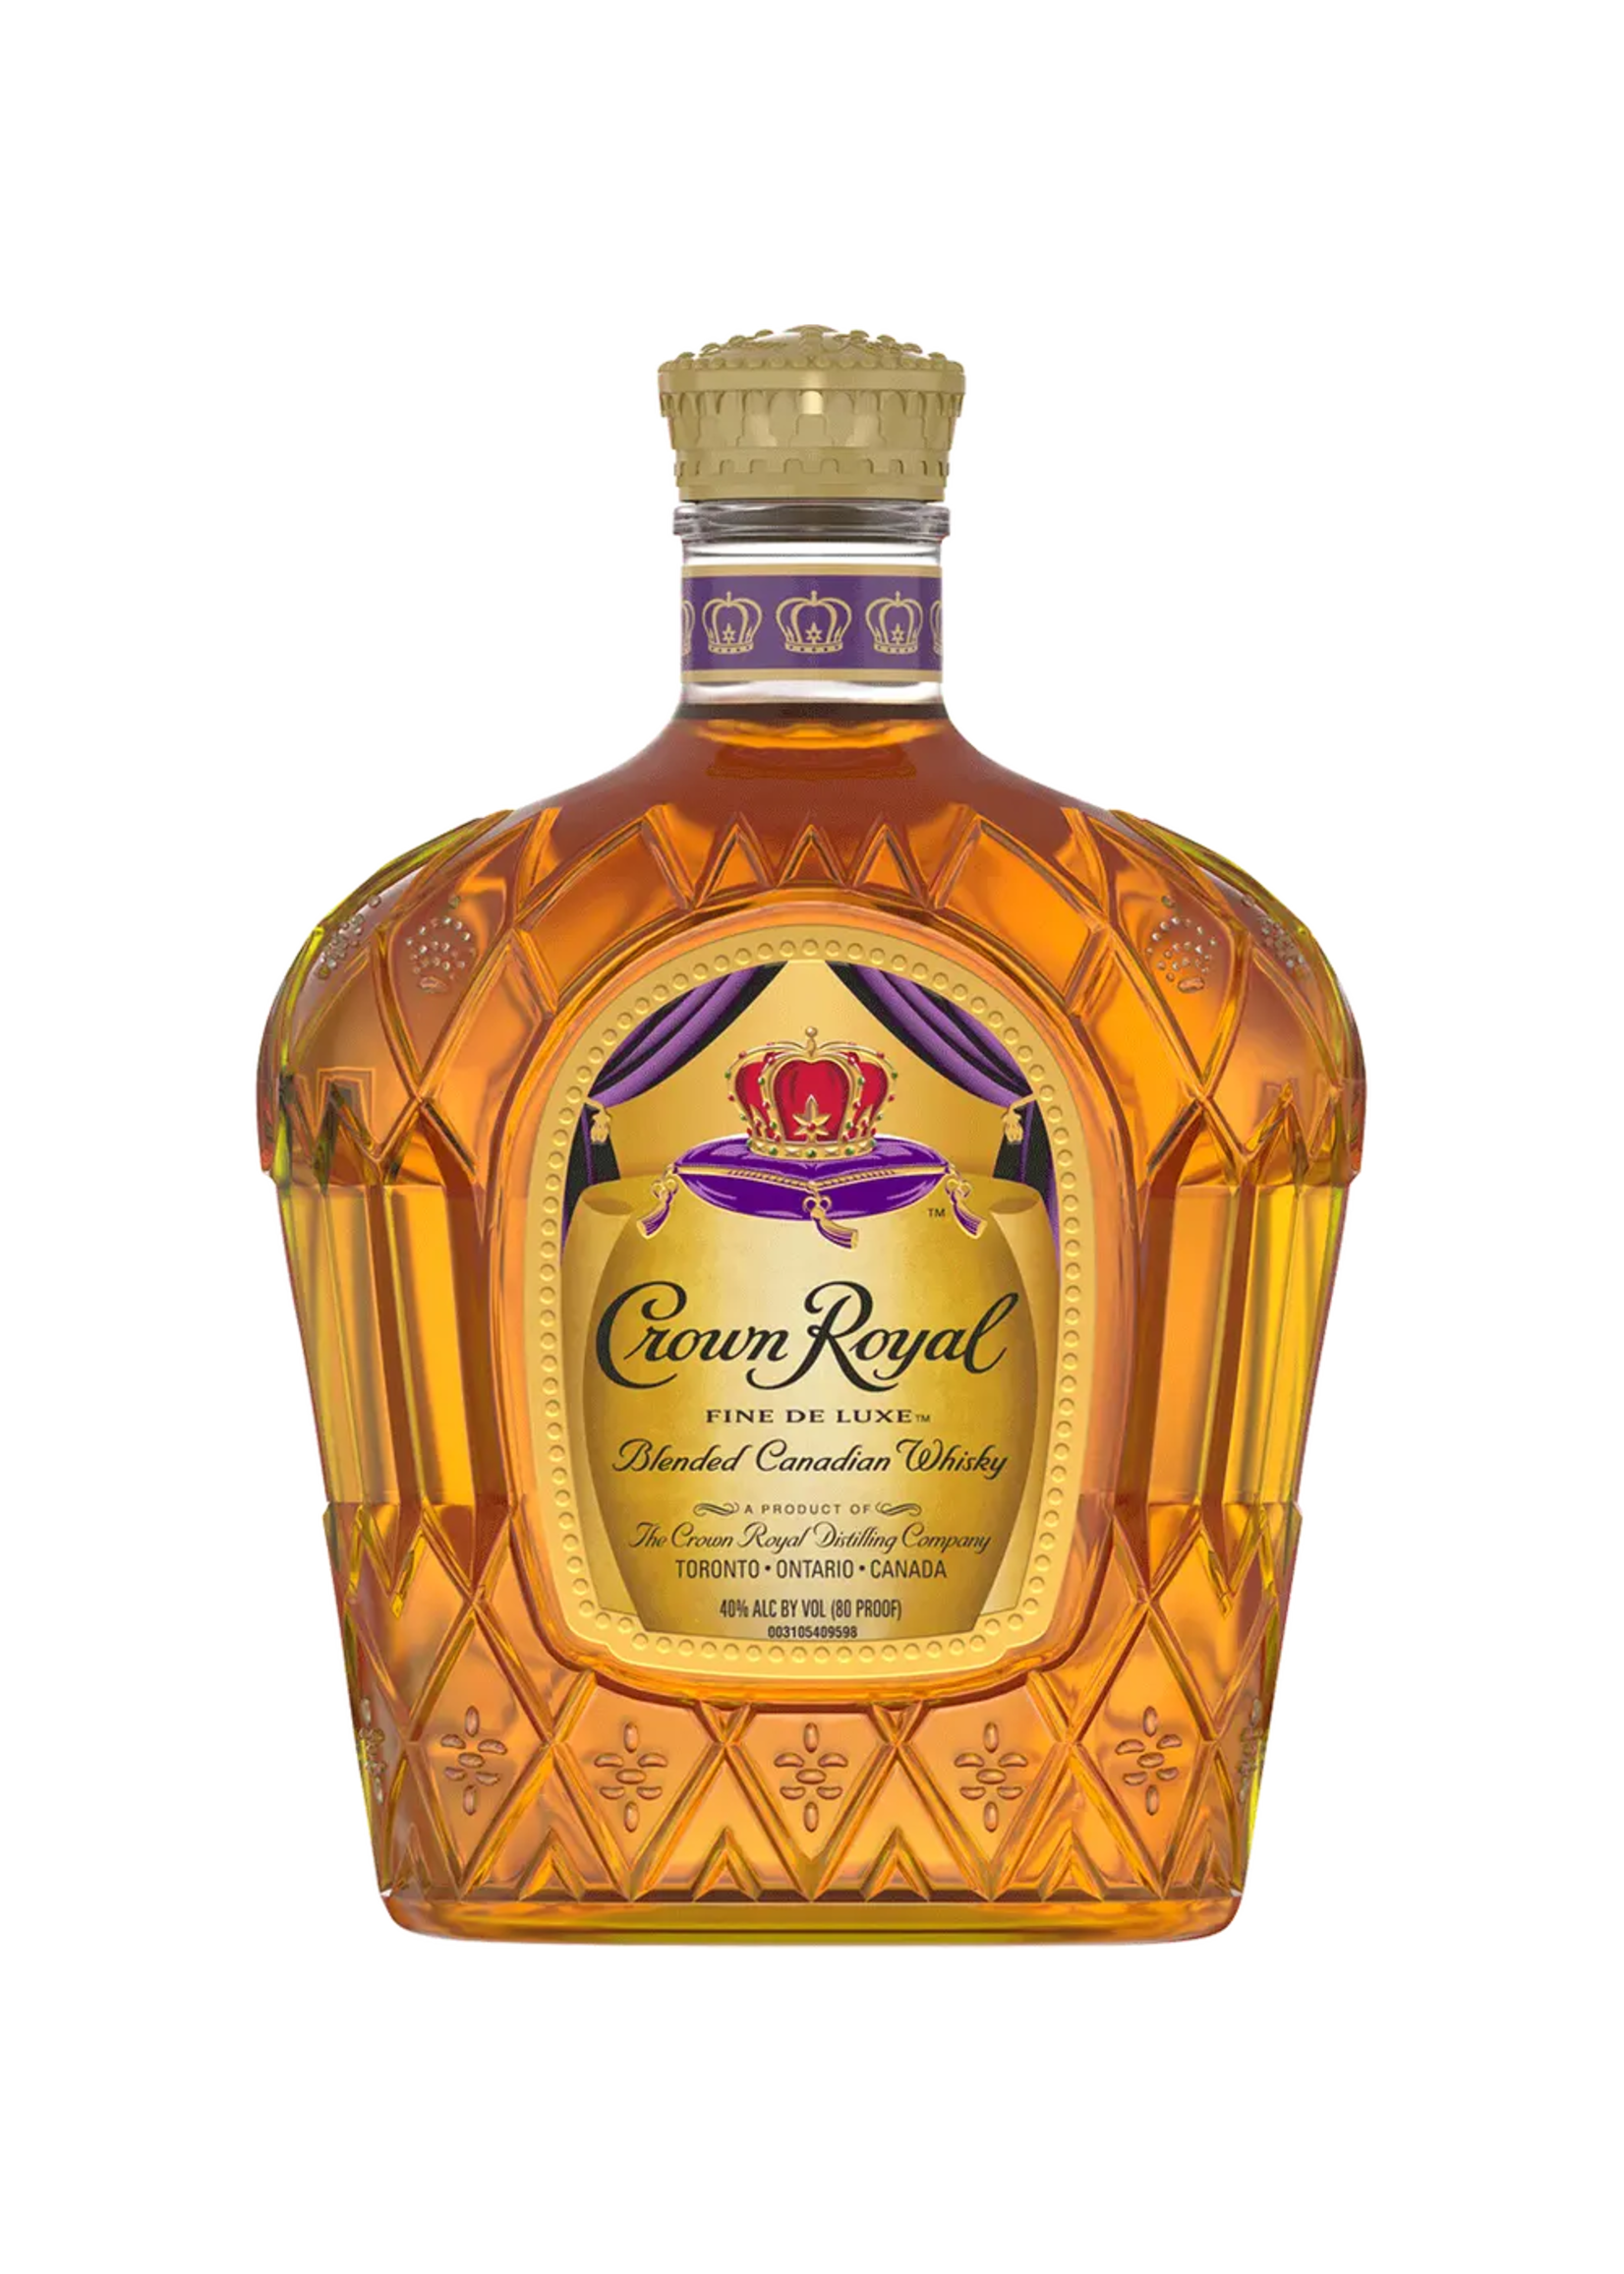 Crown Royal Crown Royal Canadian Whisky Fine Deluxe 80Proof 750ml